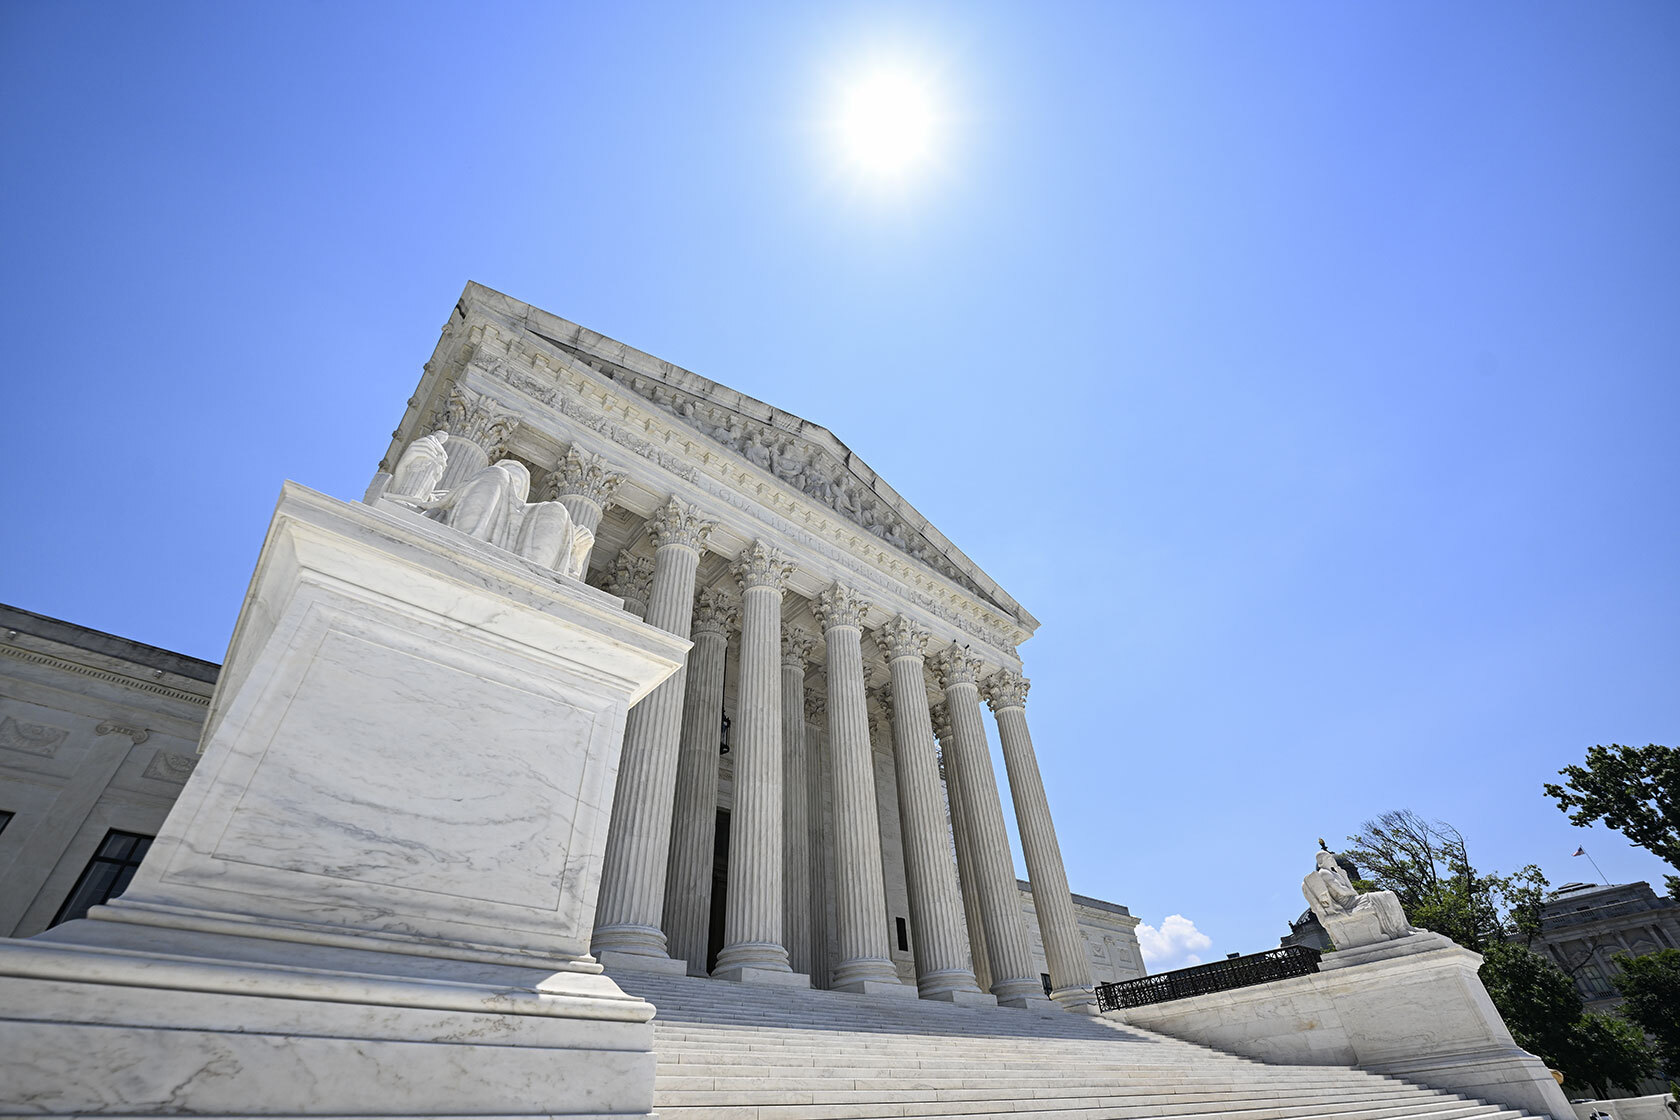 The Supreme Court of the United States building is seen in Washington, D.C.